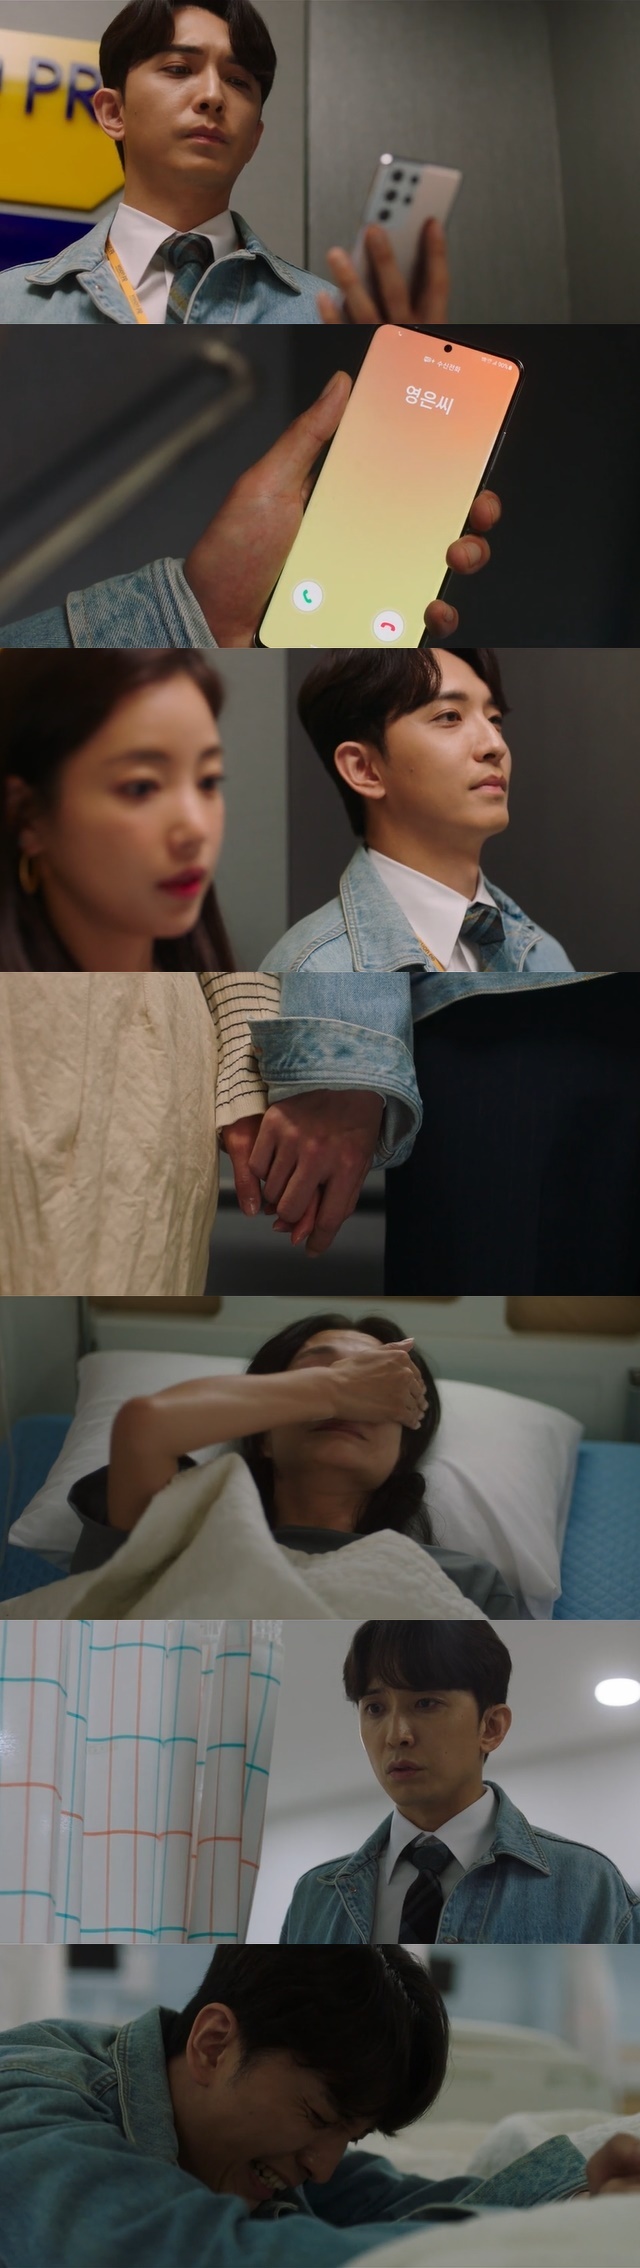 Even at the moment of his wifes collapse, his co-worker Ki Eun-se and Yun bamboo, who was in an affair, shed tears of penance when he learned late on the deadline of his wife Park Hyo-joo.In the 8th episode of SBSs gilt drama Now, Im Breaking Up (playplayplayed by Jane, directed by Lee Gil-bok), which was broadcast on December 4, Jeon Mi-sook (Park Hyo-joo) collapsed and the fact of pancreatic cancer was revealed.On the day, Jeon Mi-sook fell down in the bathroom, calling Friend Ha Young (Song Hye-kyo) for the pain caused by pancreatic cancer.Ha Young guessed that it was an unusual situation, and he found Jeon Mi-sooks house with the paramedics, and moved her to the hospital and became the first to know about the illness.Former husband Kwak Soo-ho, who had previously been secretly sharing a touch with his office wife, Seo Min-kyung (Ki Eun-se), was late to visit the hospital while refusing to call Ha Young-eun urgently.And I was shocked to hear the condition of Jeon Mi-sook. Kwak Soo-ho said, How are you, premature baby?